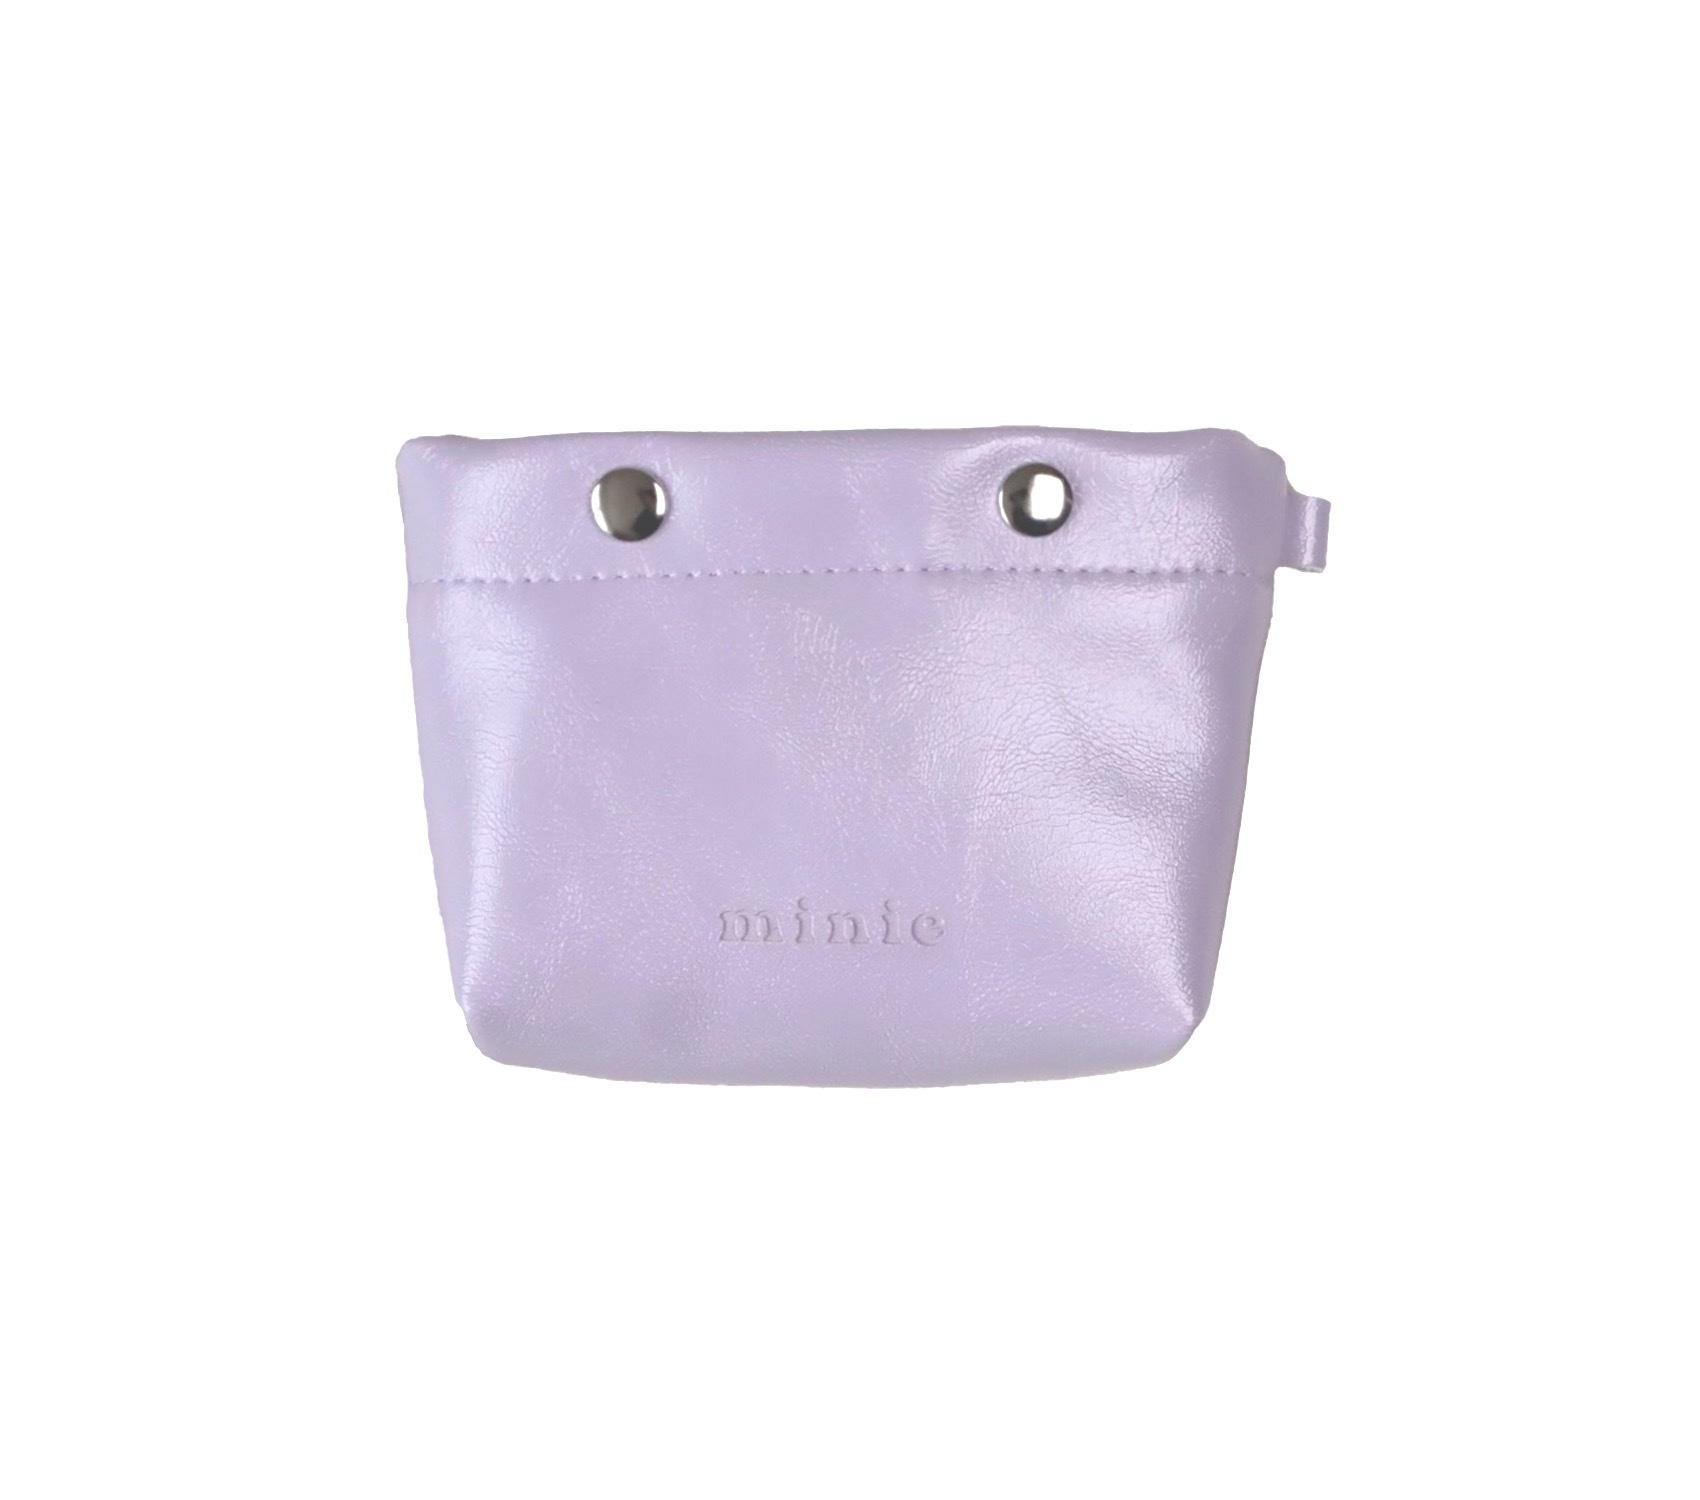 cooing wallet - purple